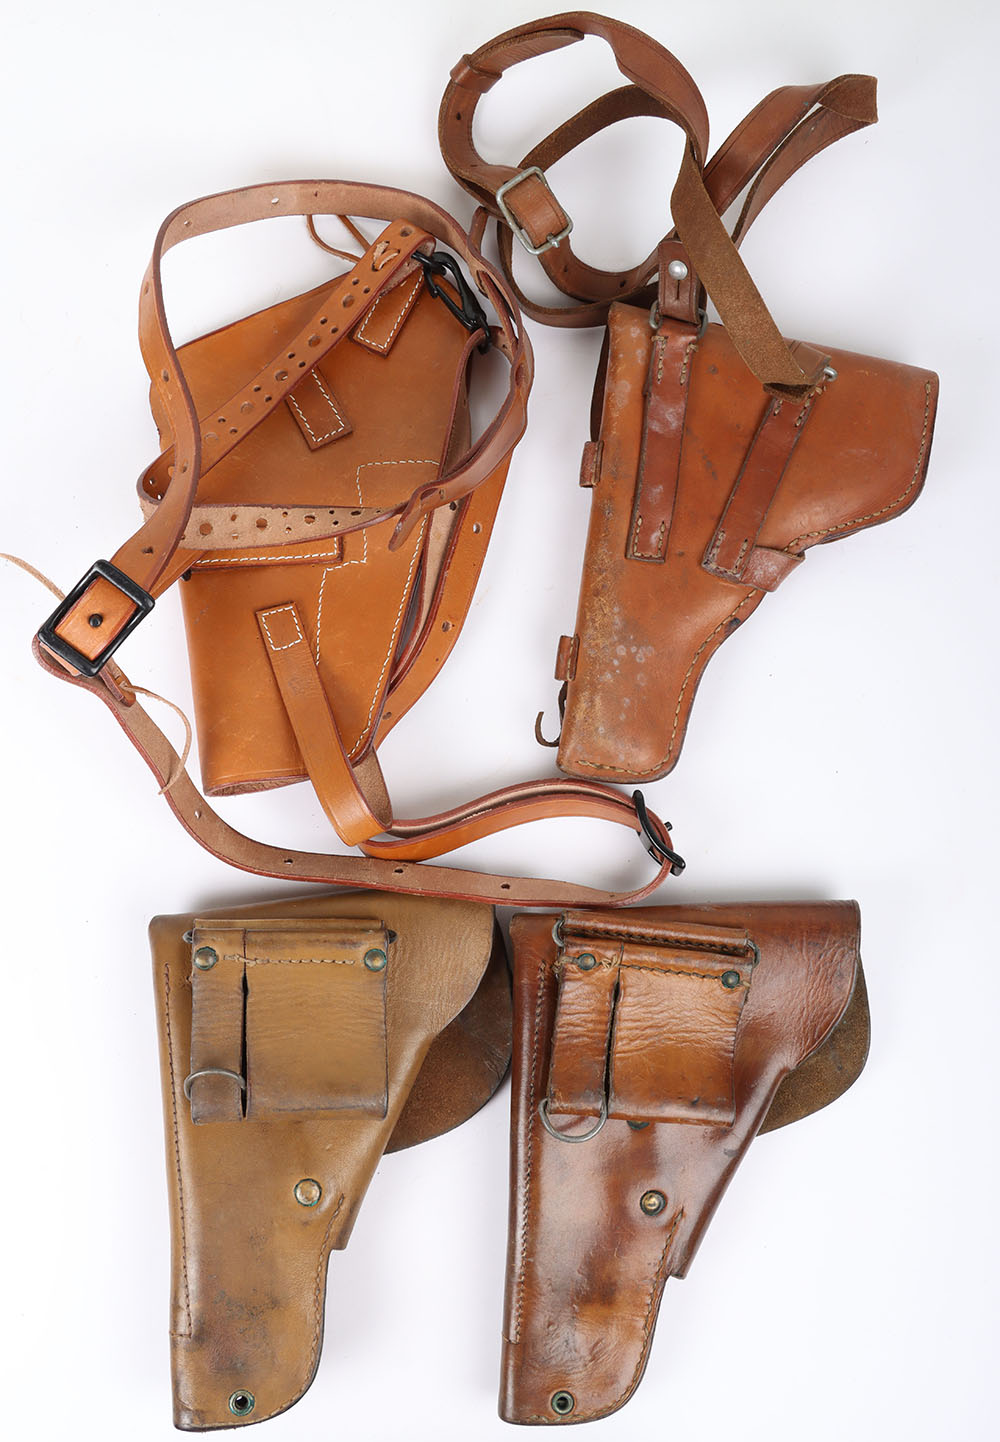 Military Holsters - Image 5 of 8